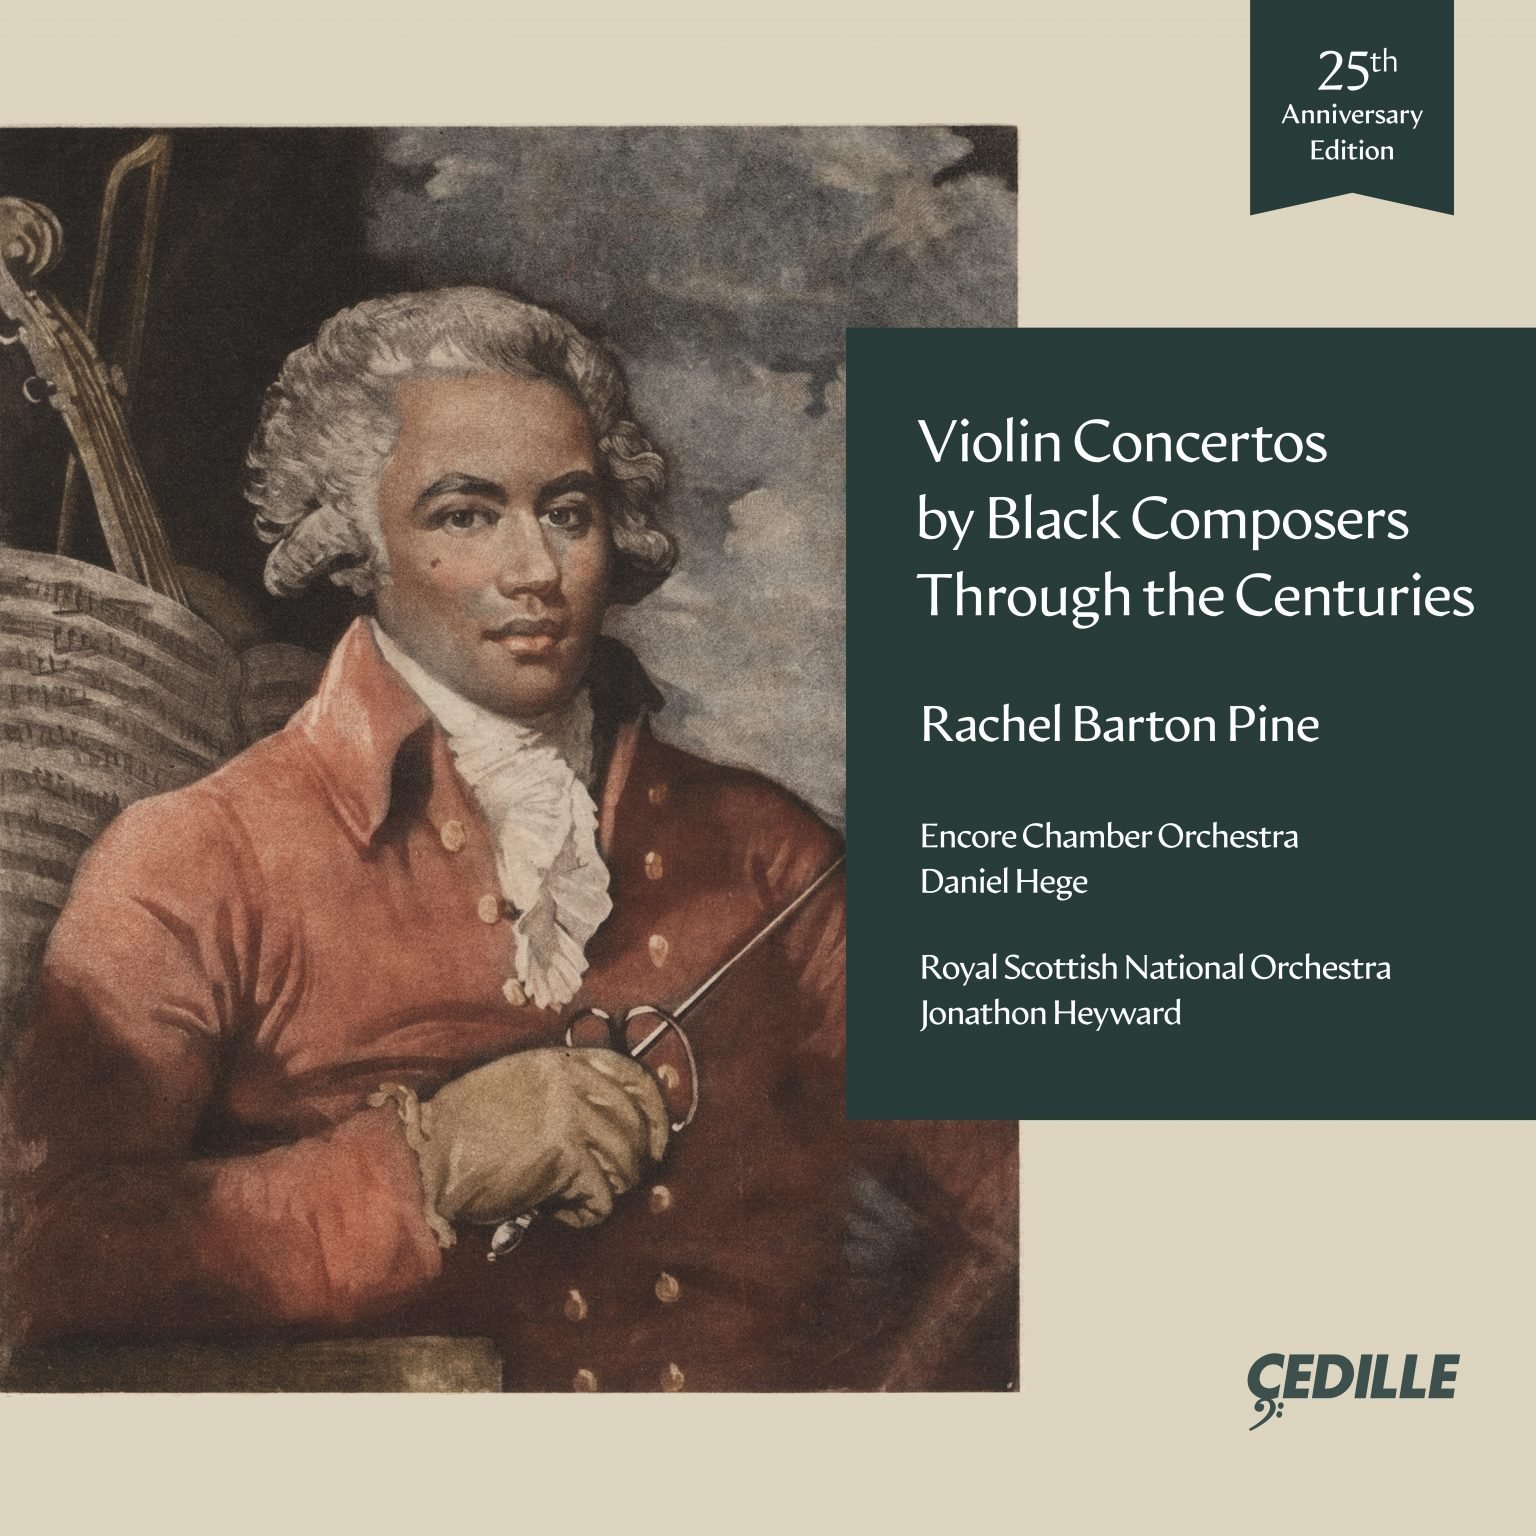 25th Anniversary Edition of Violin Concertos by Black Composers Through the Centuries (Copy)